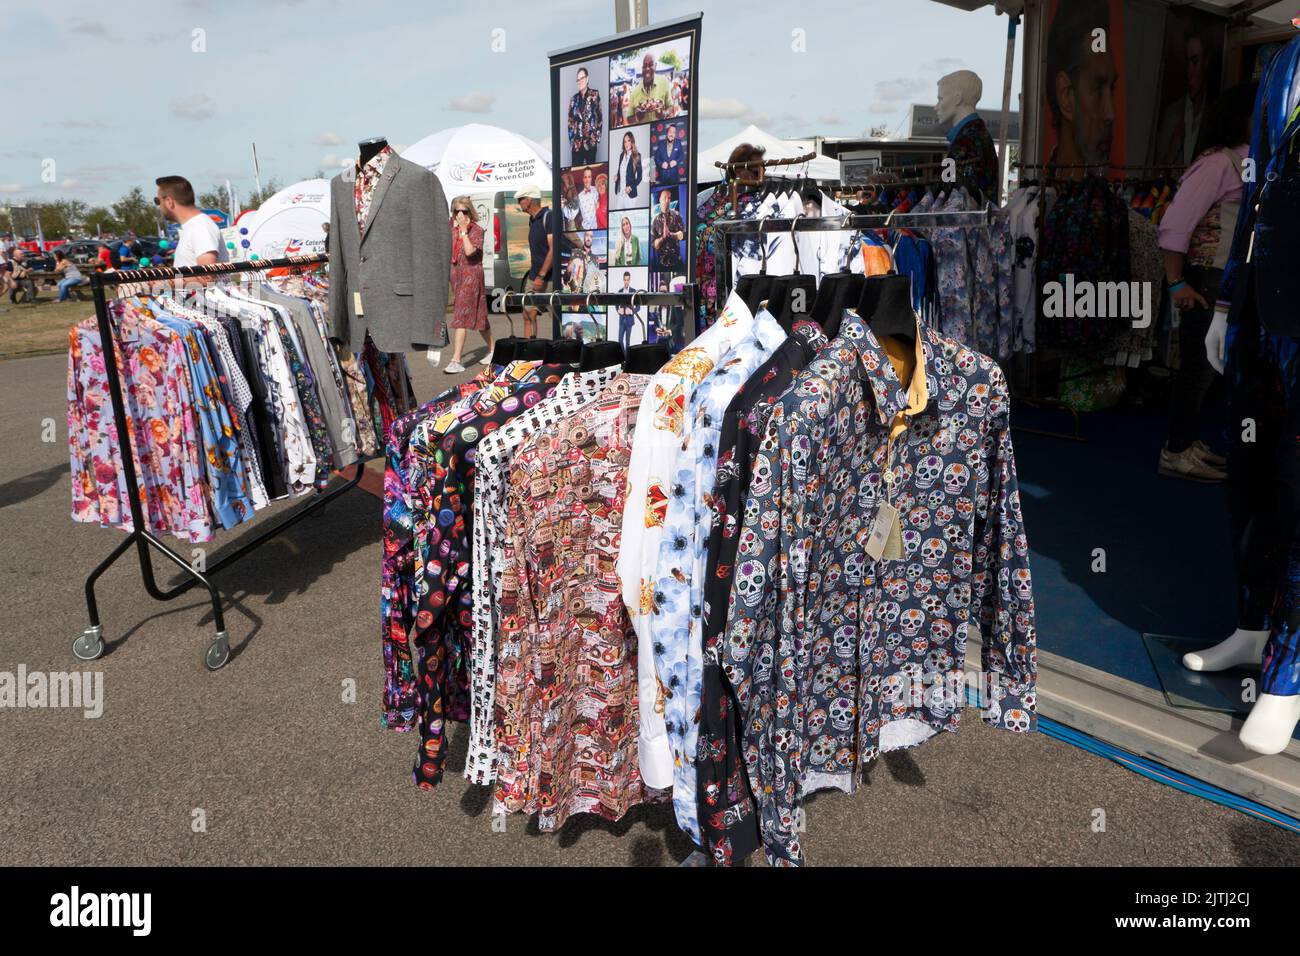 Outside view of Claudio Lugli's Fashion Stall, located at the 2022 Silverstone Classic Stock Photo